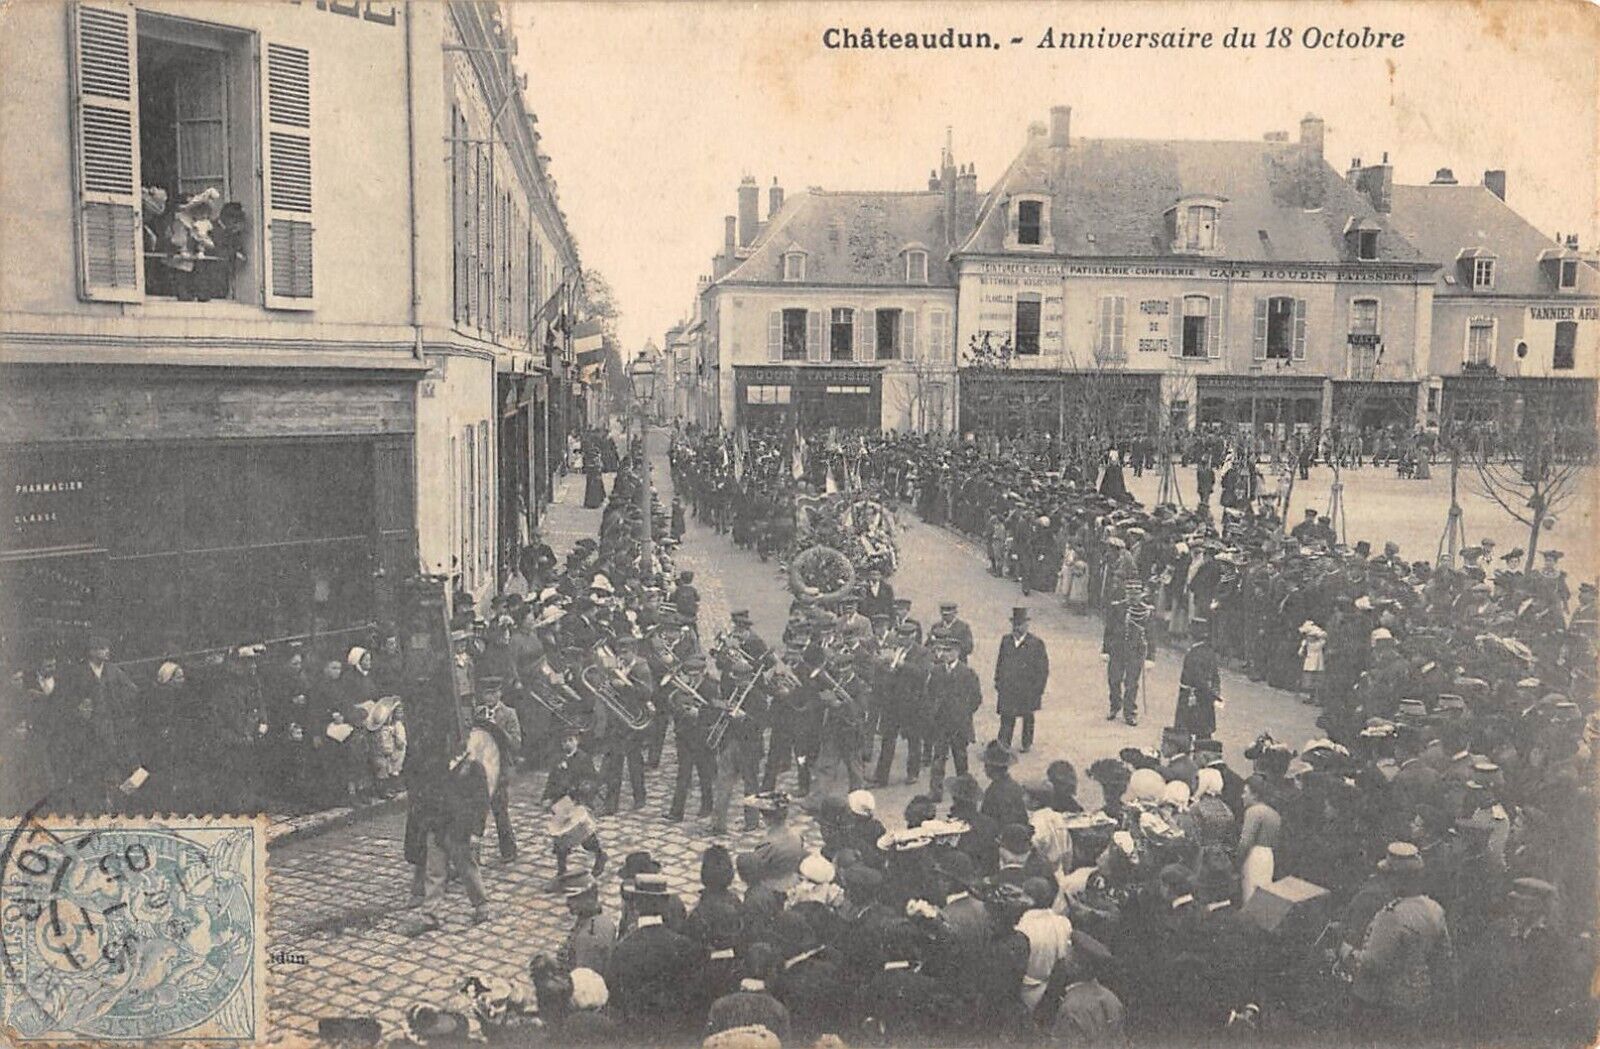 CPA 28 CHATEAUDUN / ANNIVERSARY OF OCTOBER 18